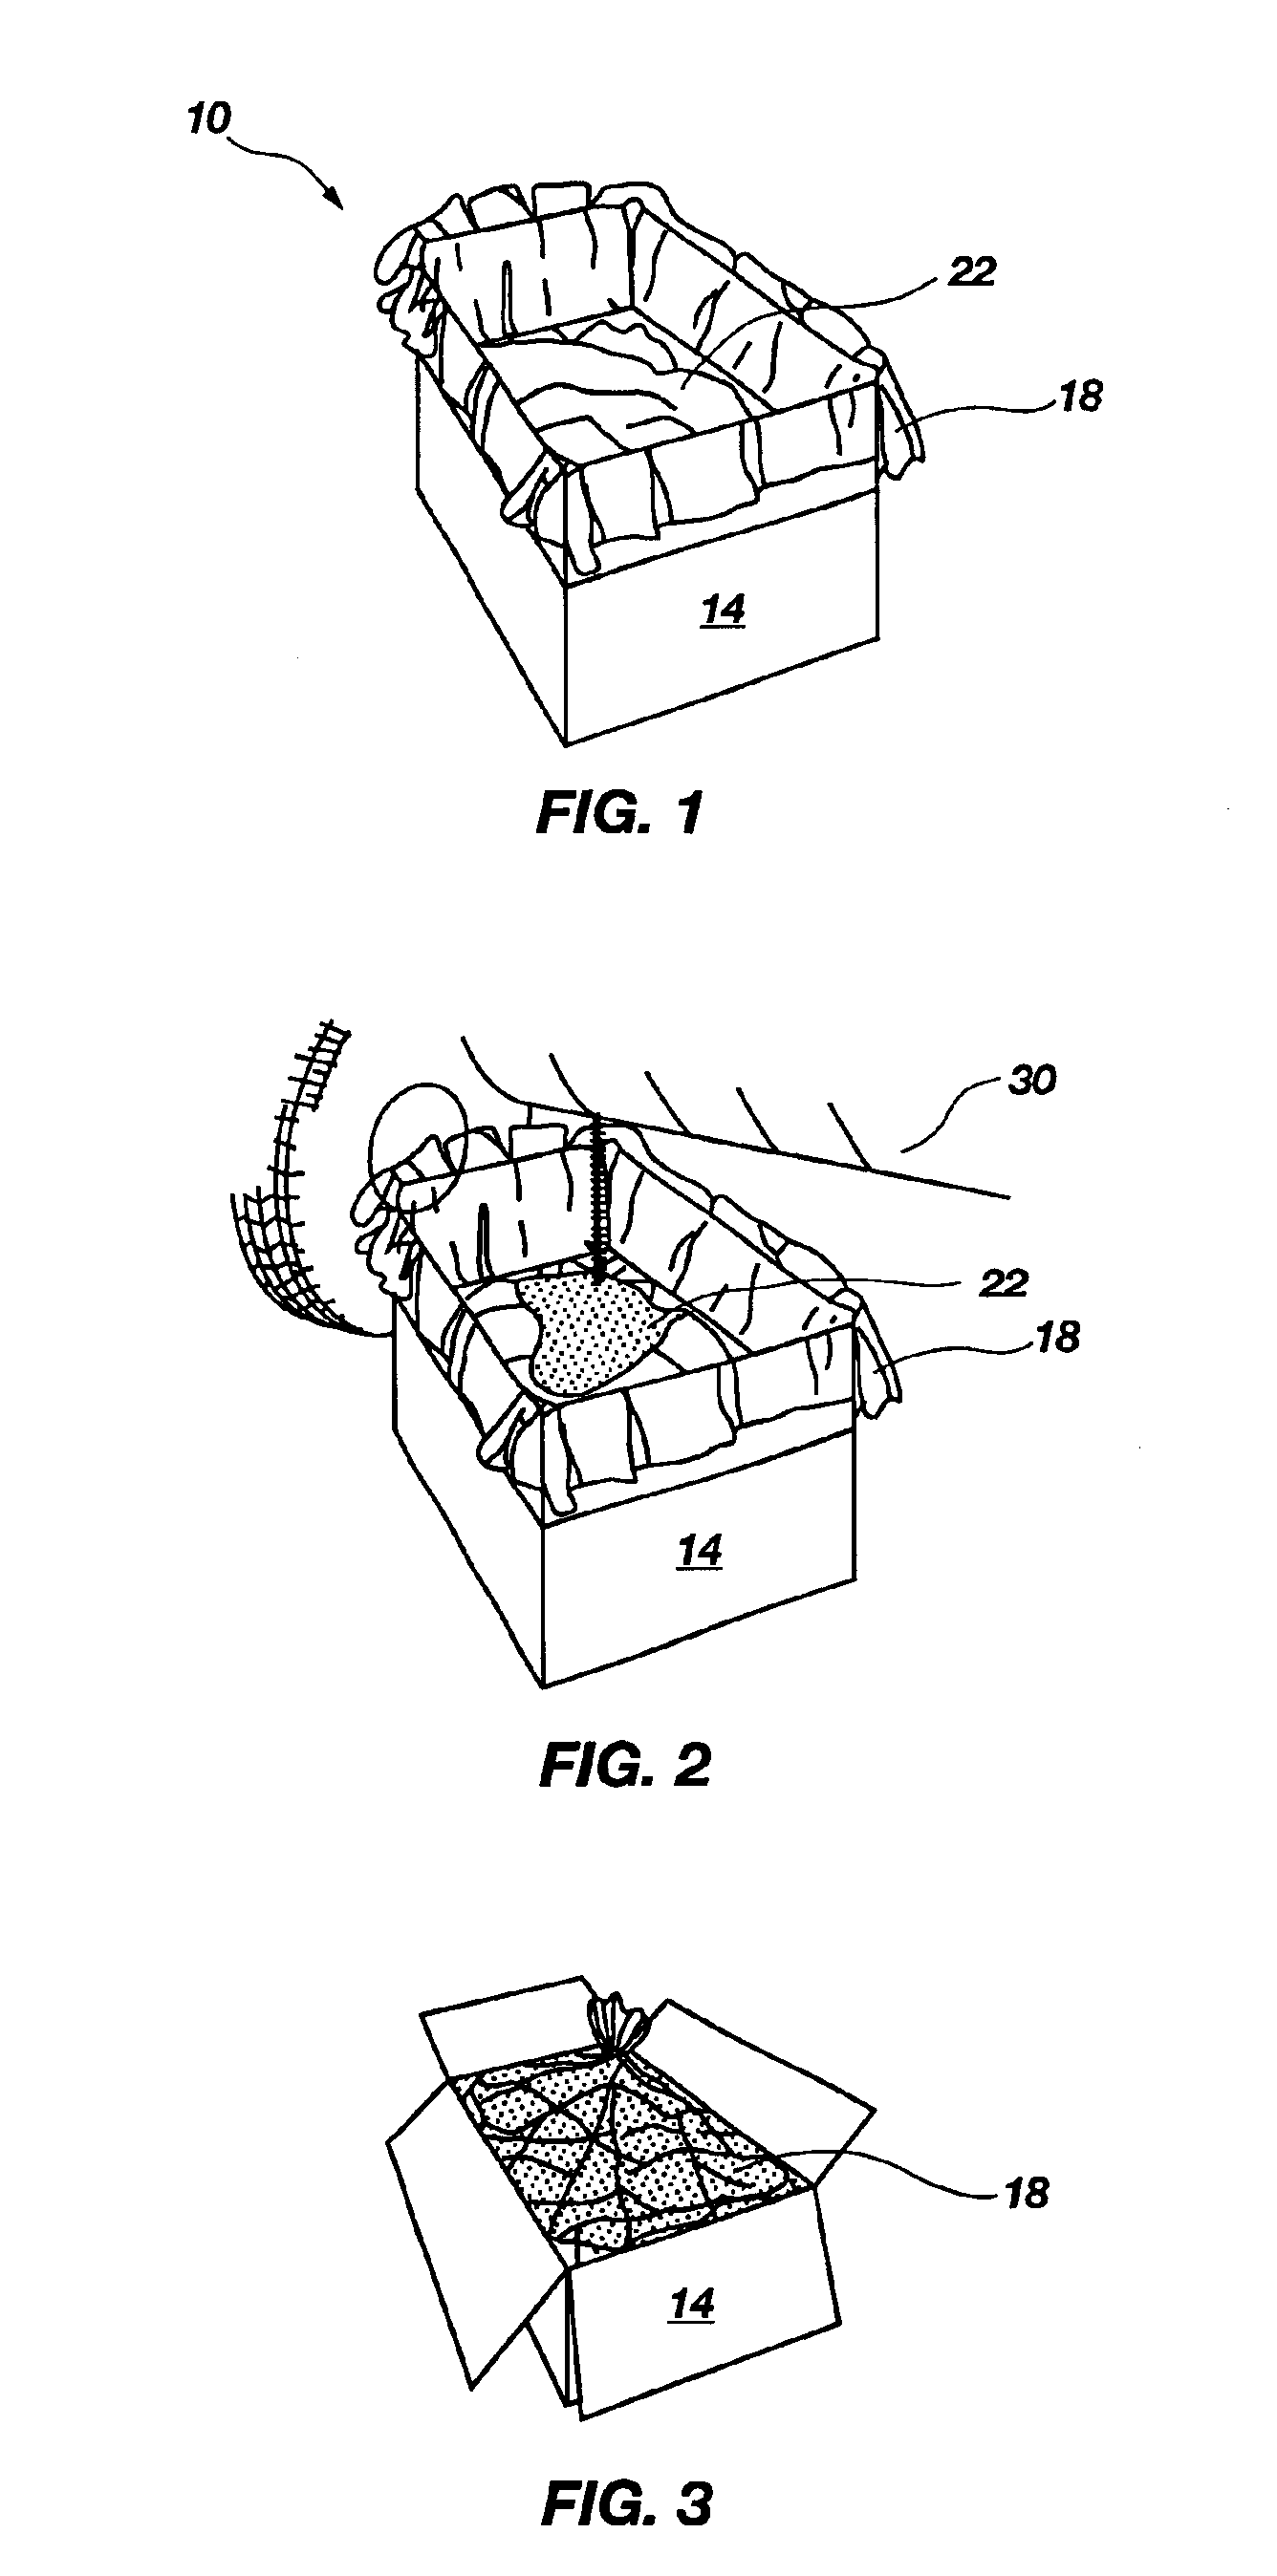 Disposable fluid changing kit and method of disposing of the same